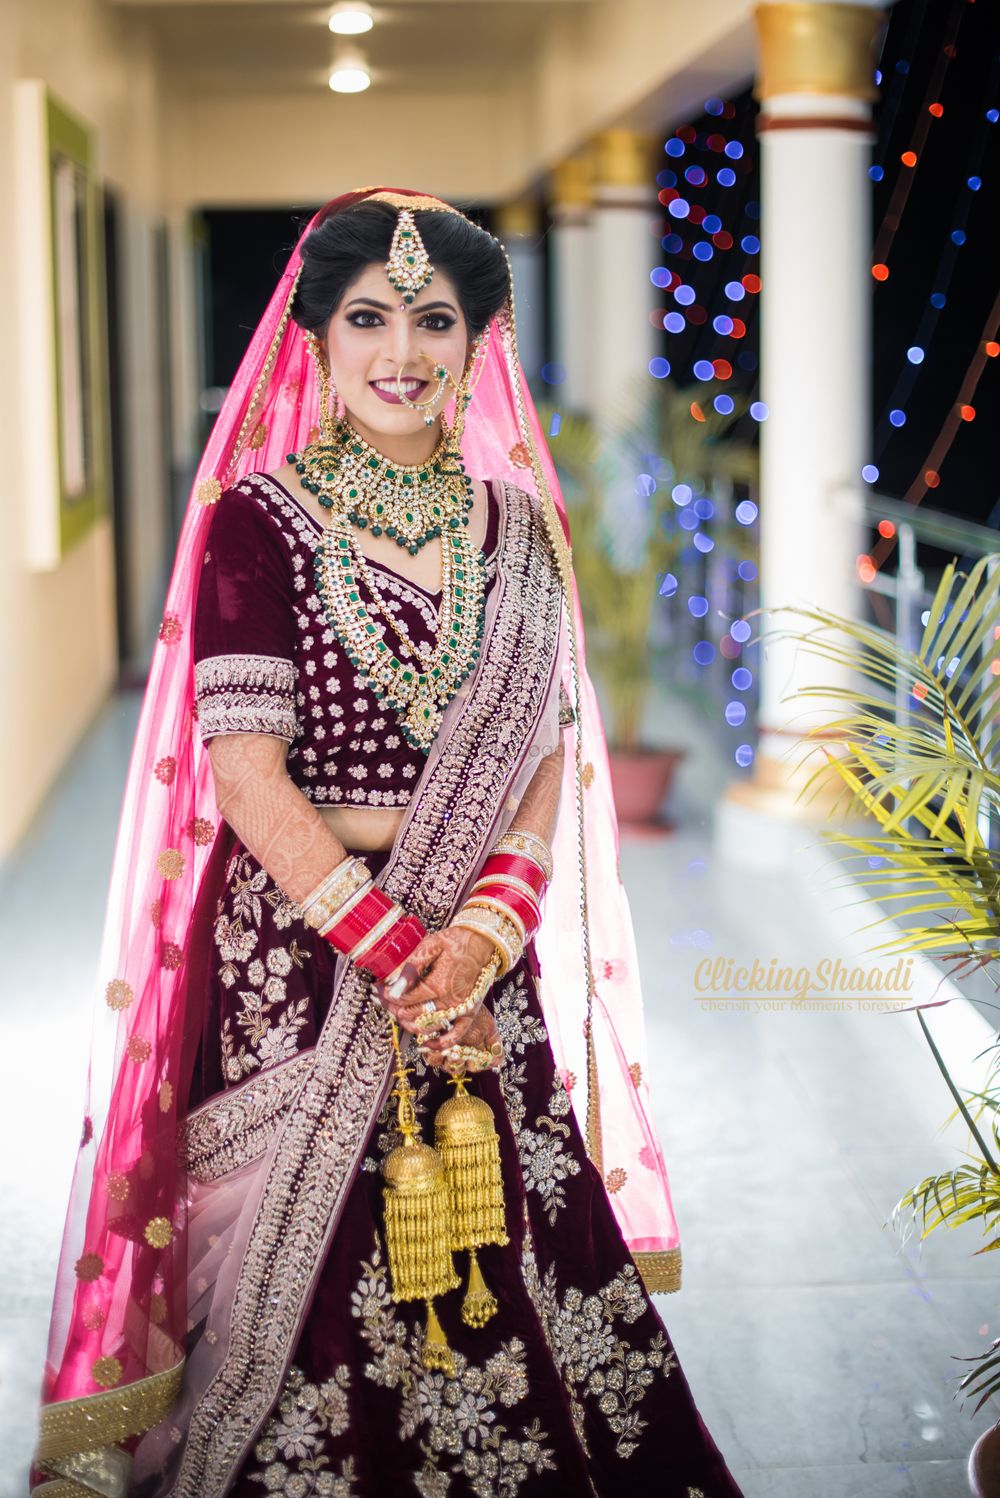 Photo From Abhijeet Weds Sumedha - By Clicking Shaadi